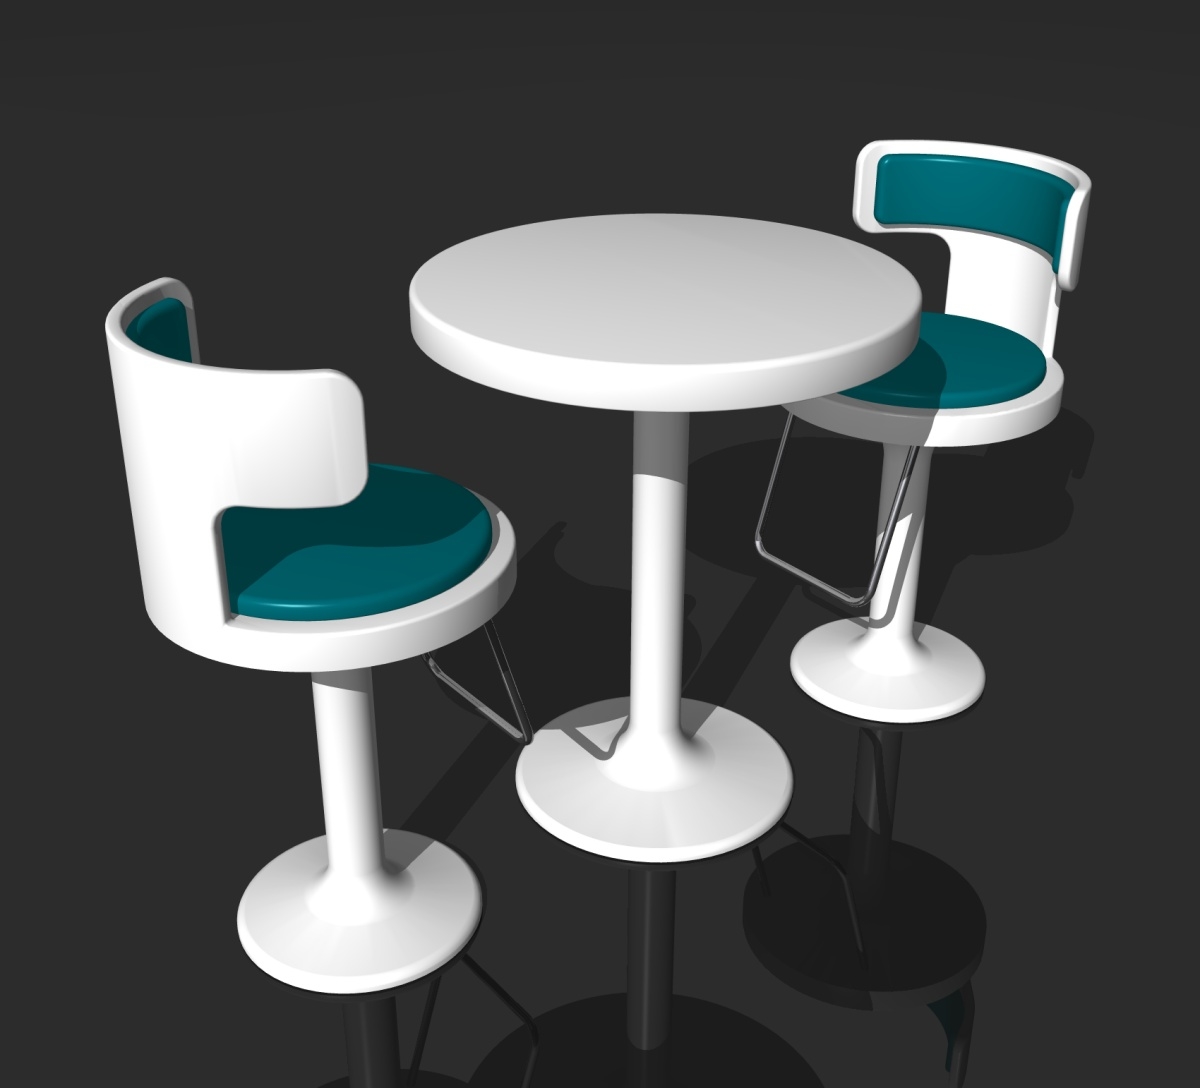 3d Model Of Retro Cafe Bar Table